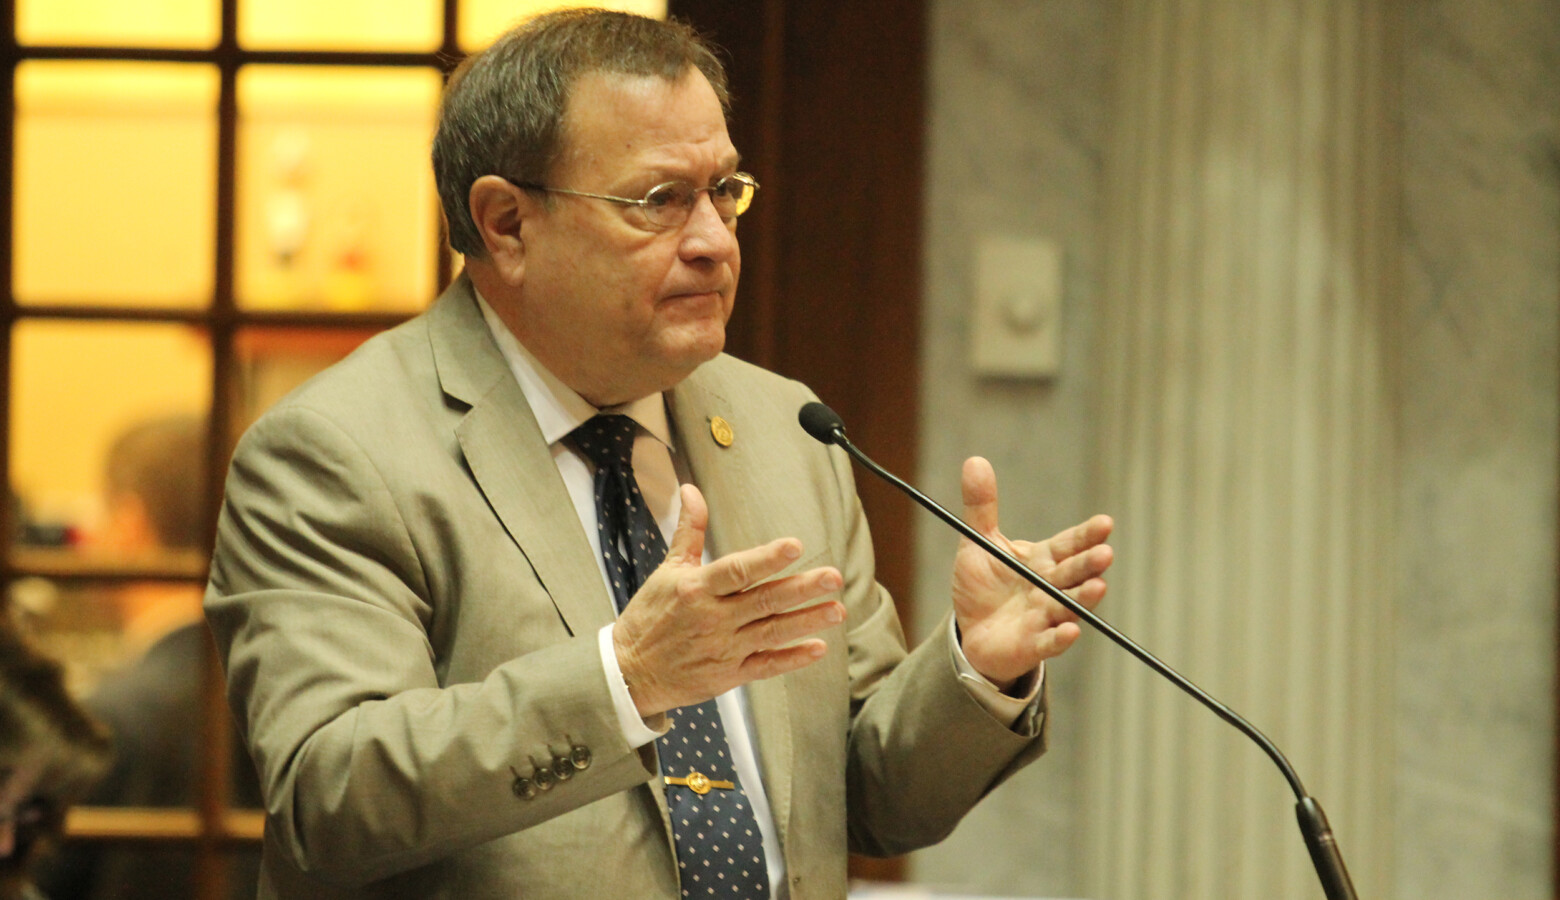 Sen. Mike Young (R-Indianapolis) says he plans to revive the prosecutorial discretion override bill in 2021. (FILE PHOTO: Lauren Chapman/IPB News)